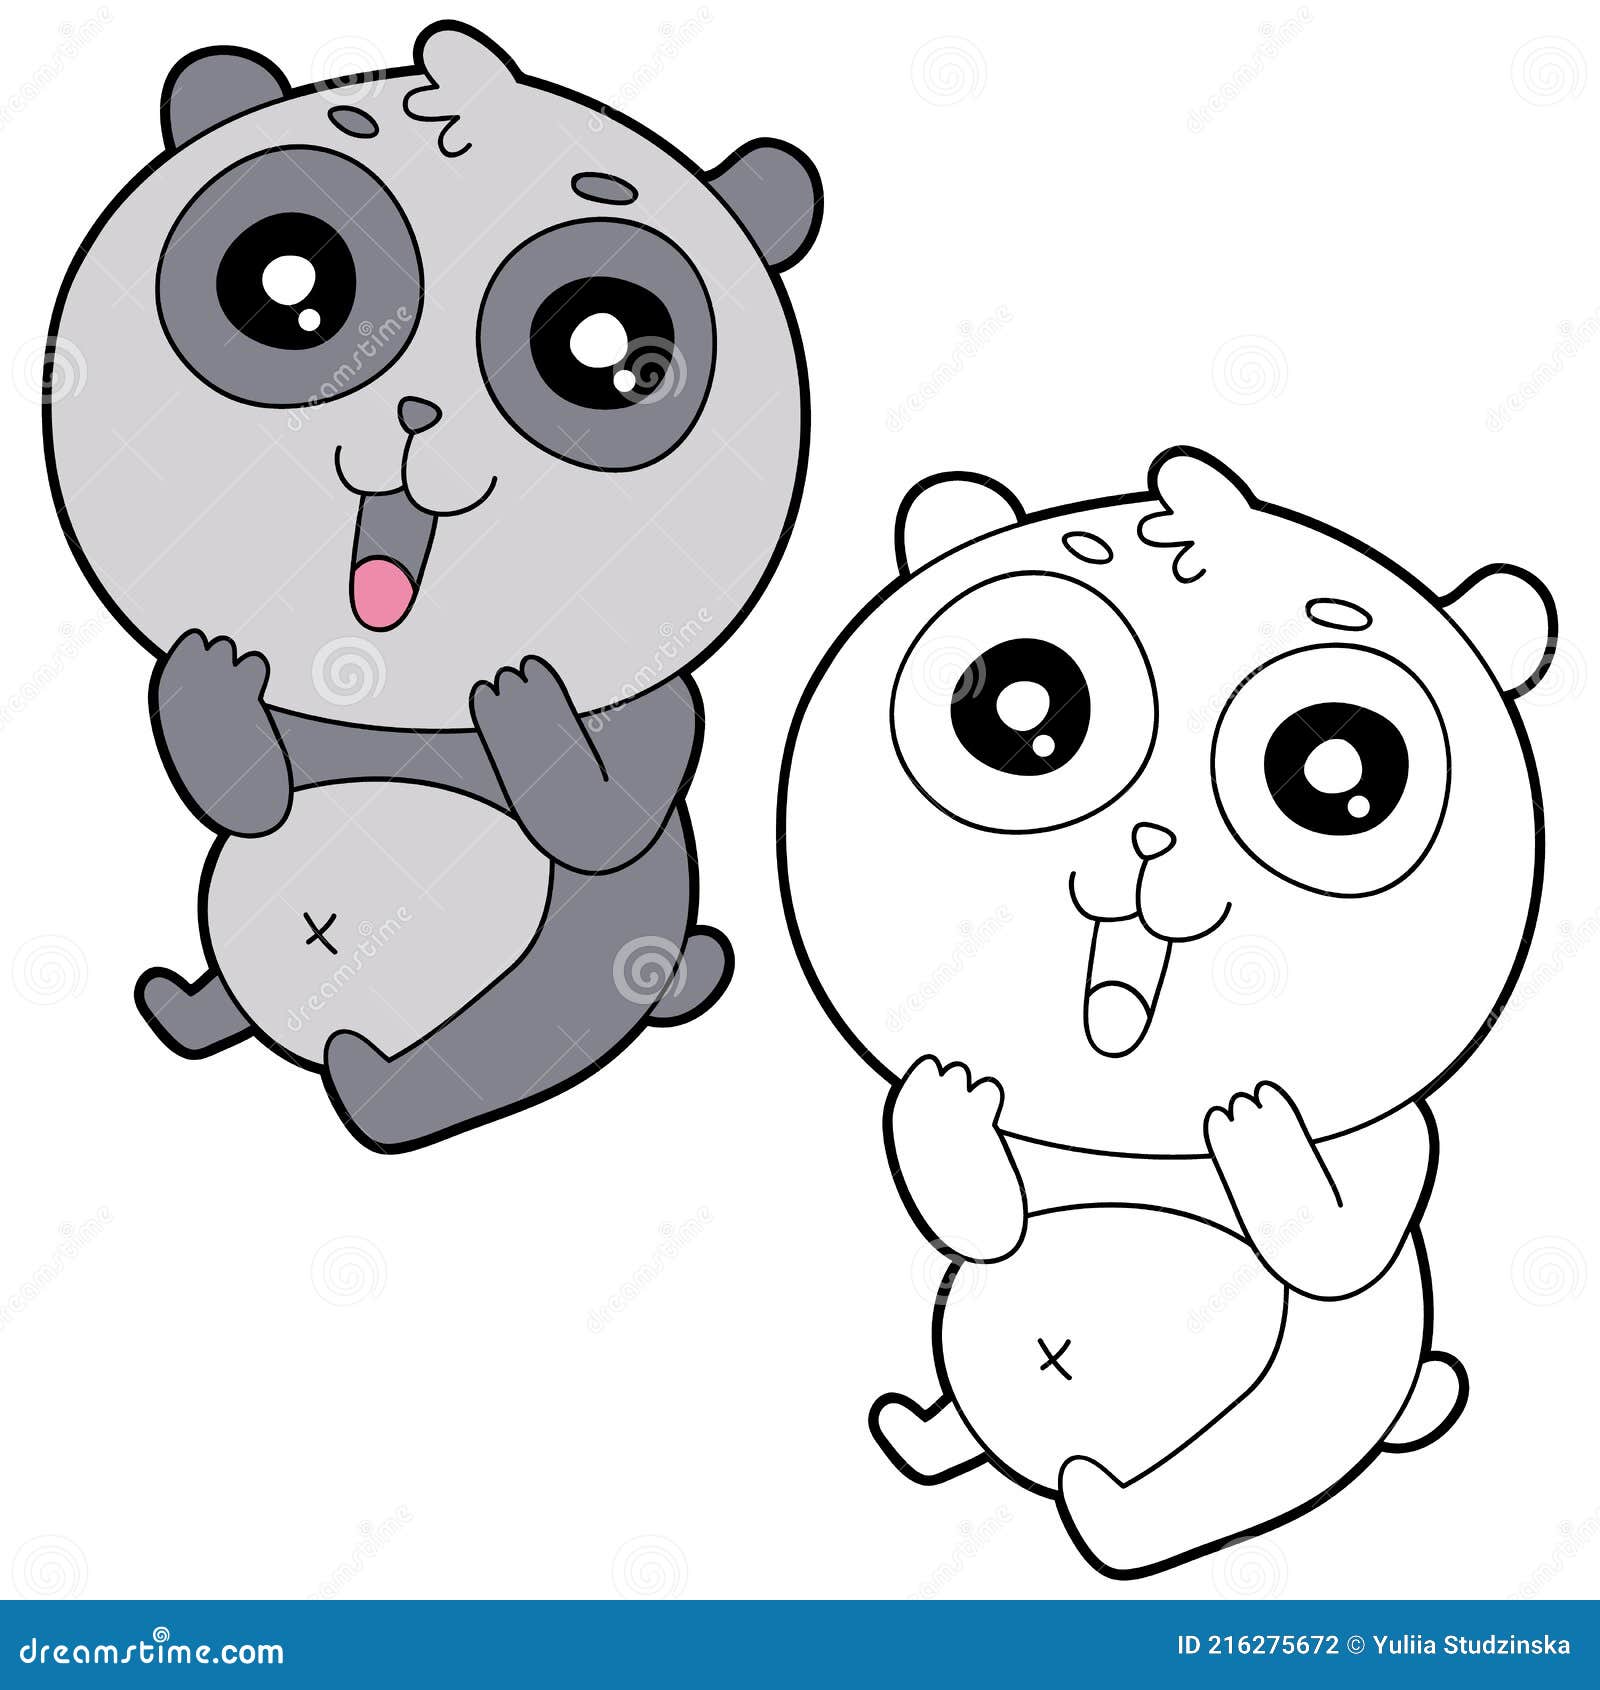 Cute Panda Coloring Books for Kids Ages Graphic by Laxuri Art